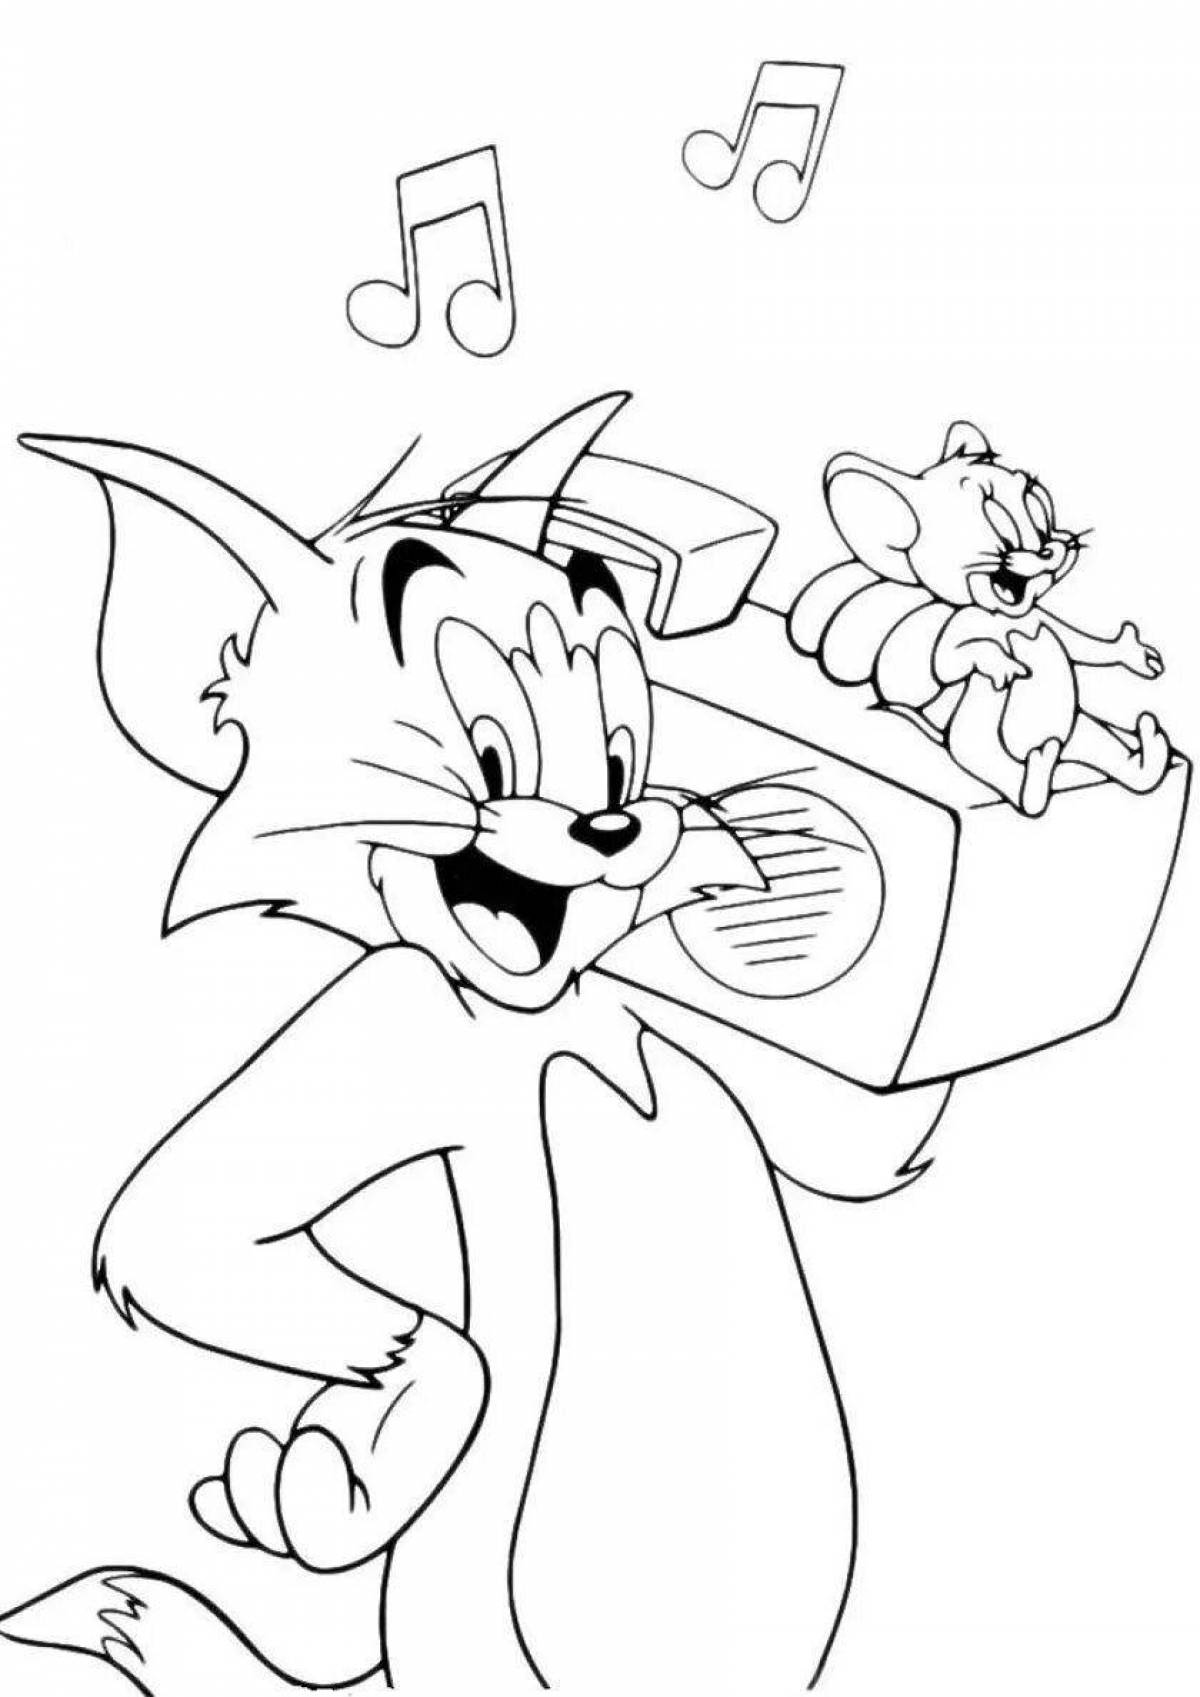 Exciting tom and jerry coloring game